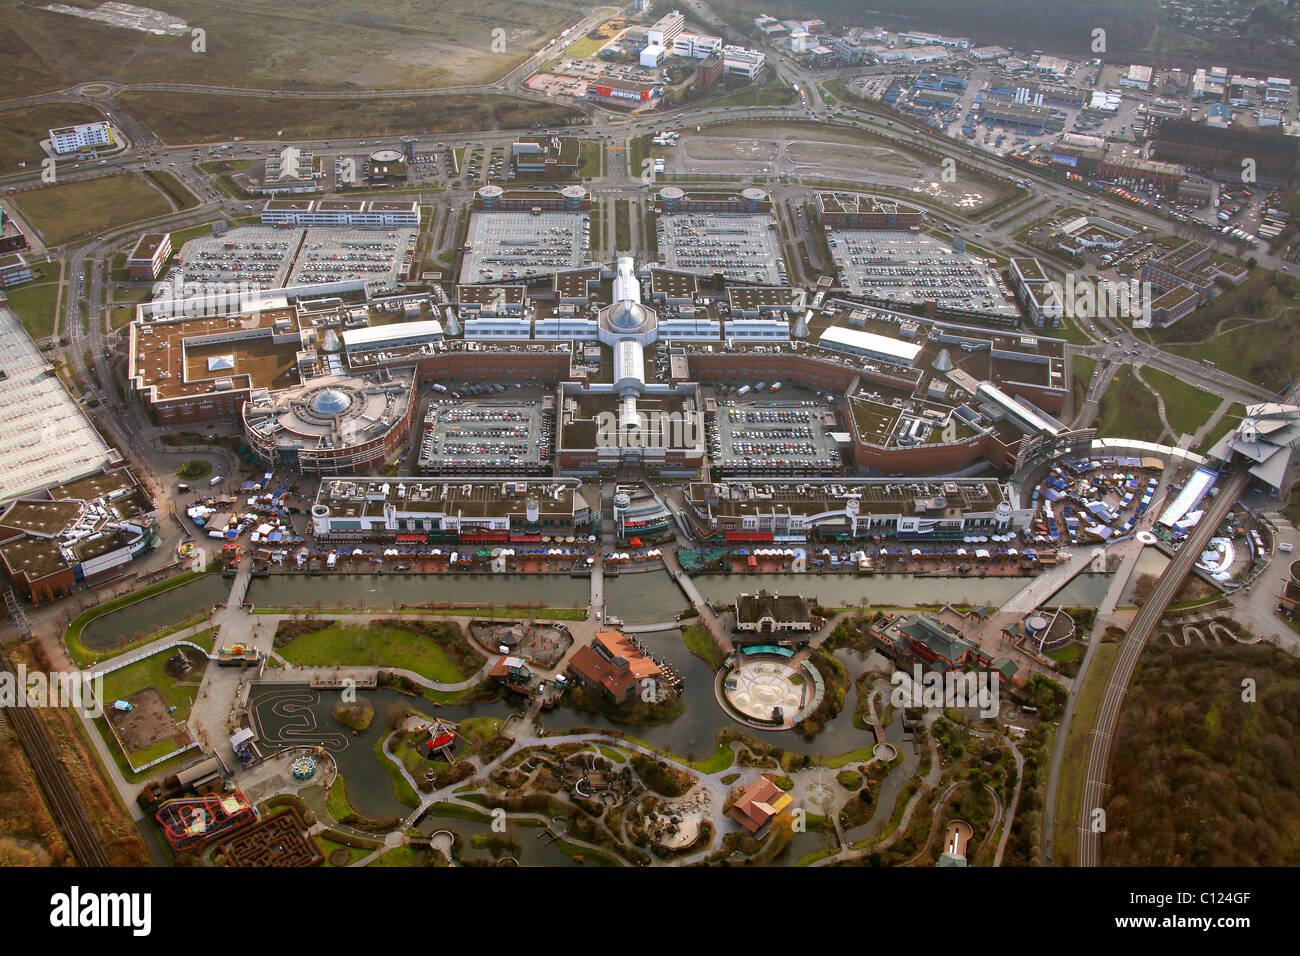 Aerial view, Neue Mitte industrial park, Christmas market at the Centro Galerie mall, Oberhausen, Ruhrgebiet region Stock Photo